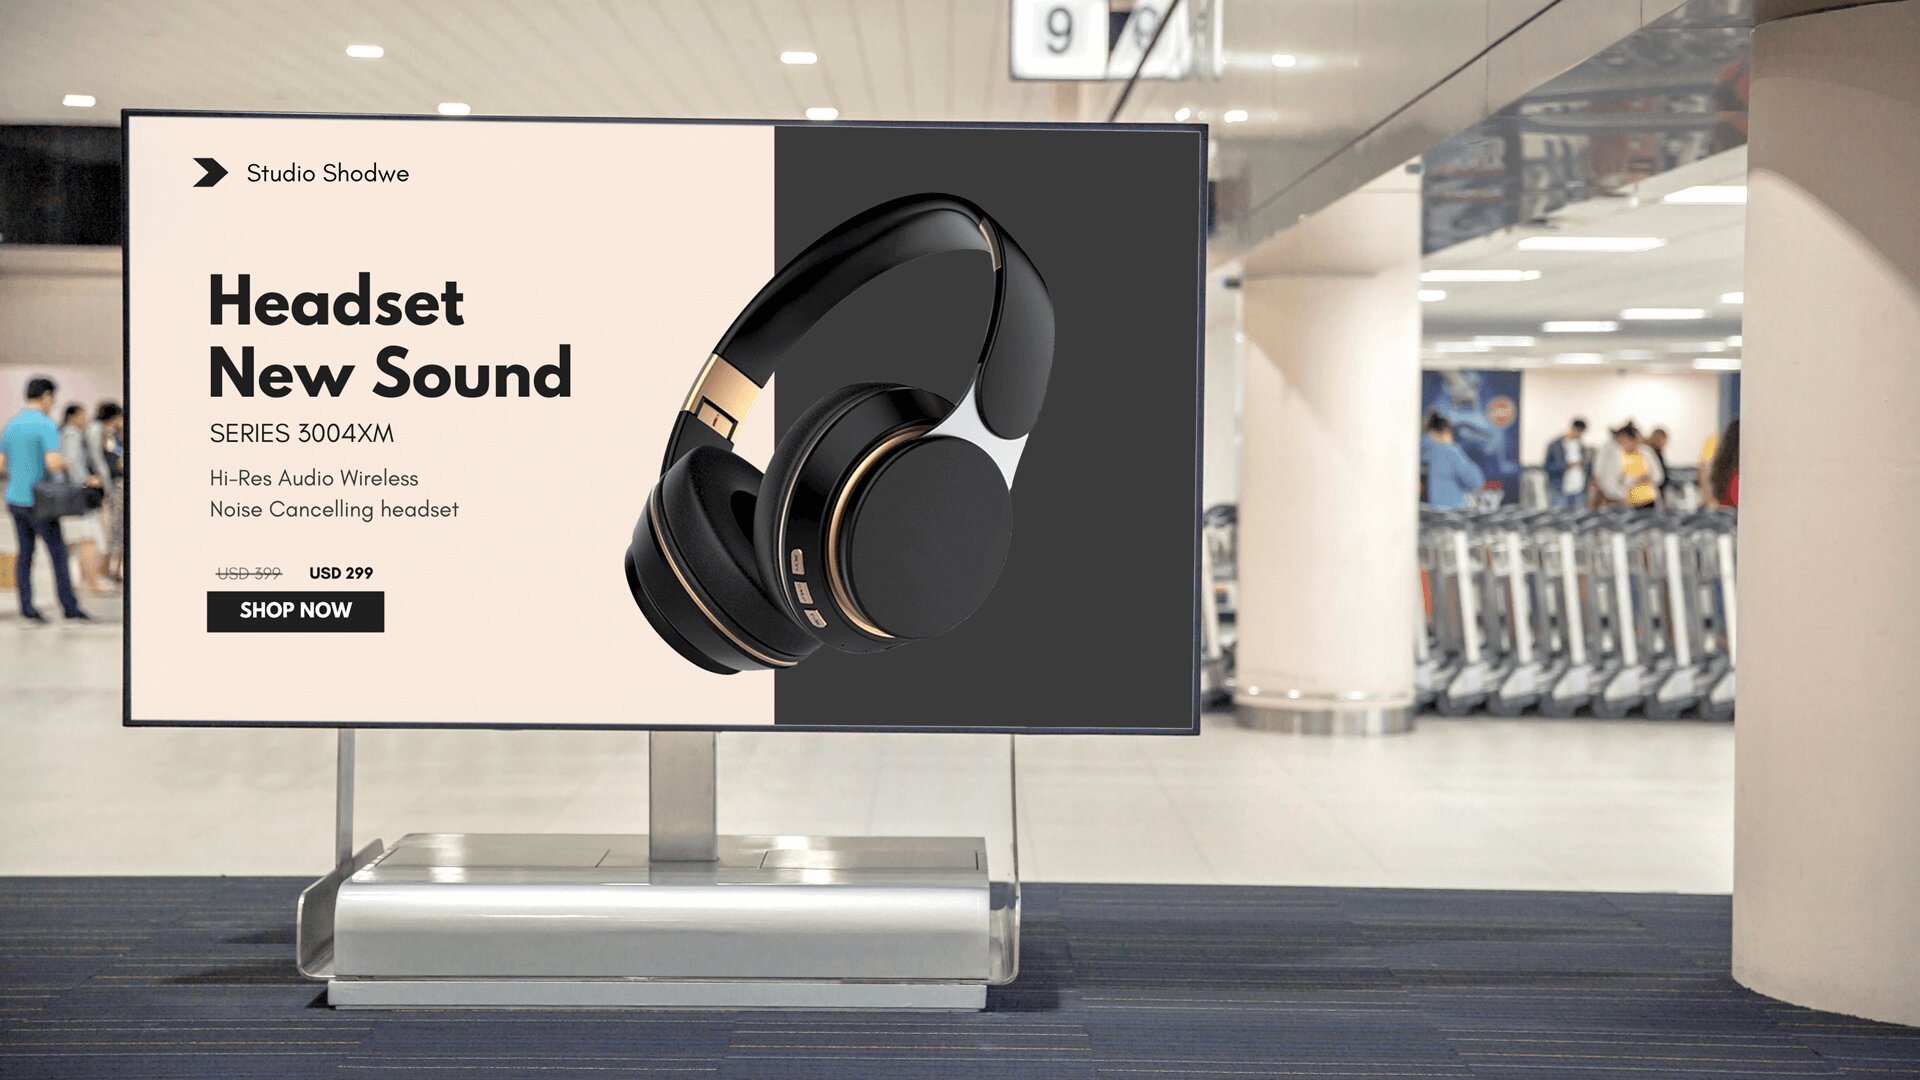 A digital signage screen shows deals on headphones with a ‘Shop Now’ call to action and offer price.